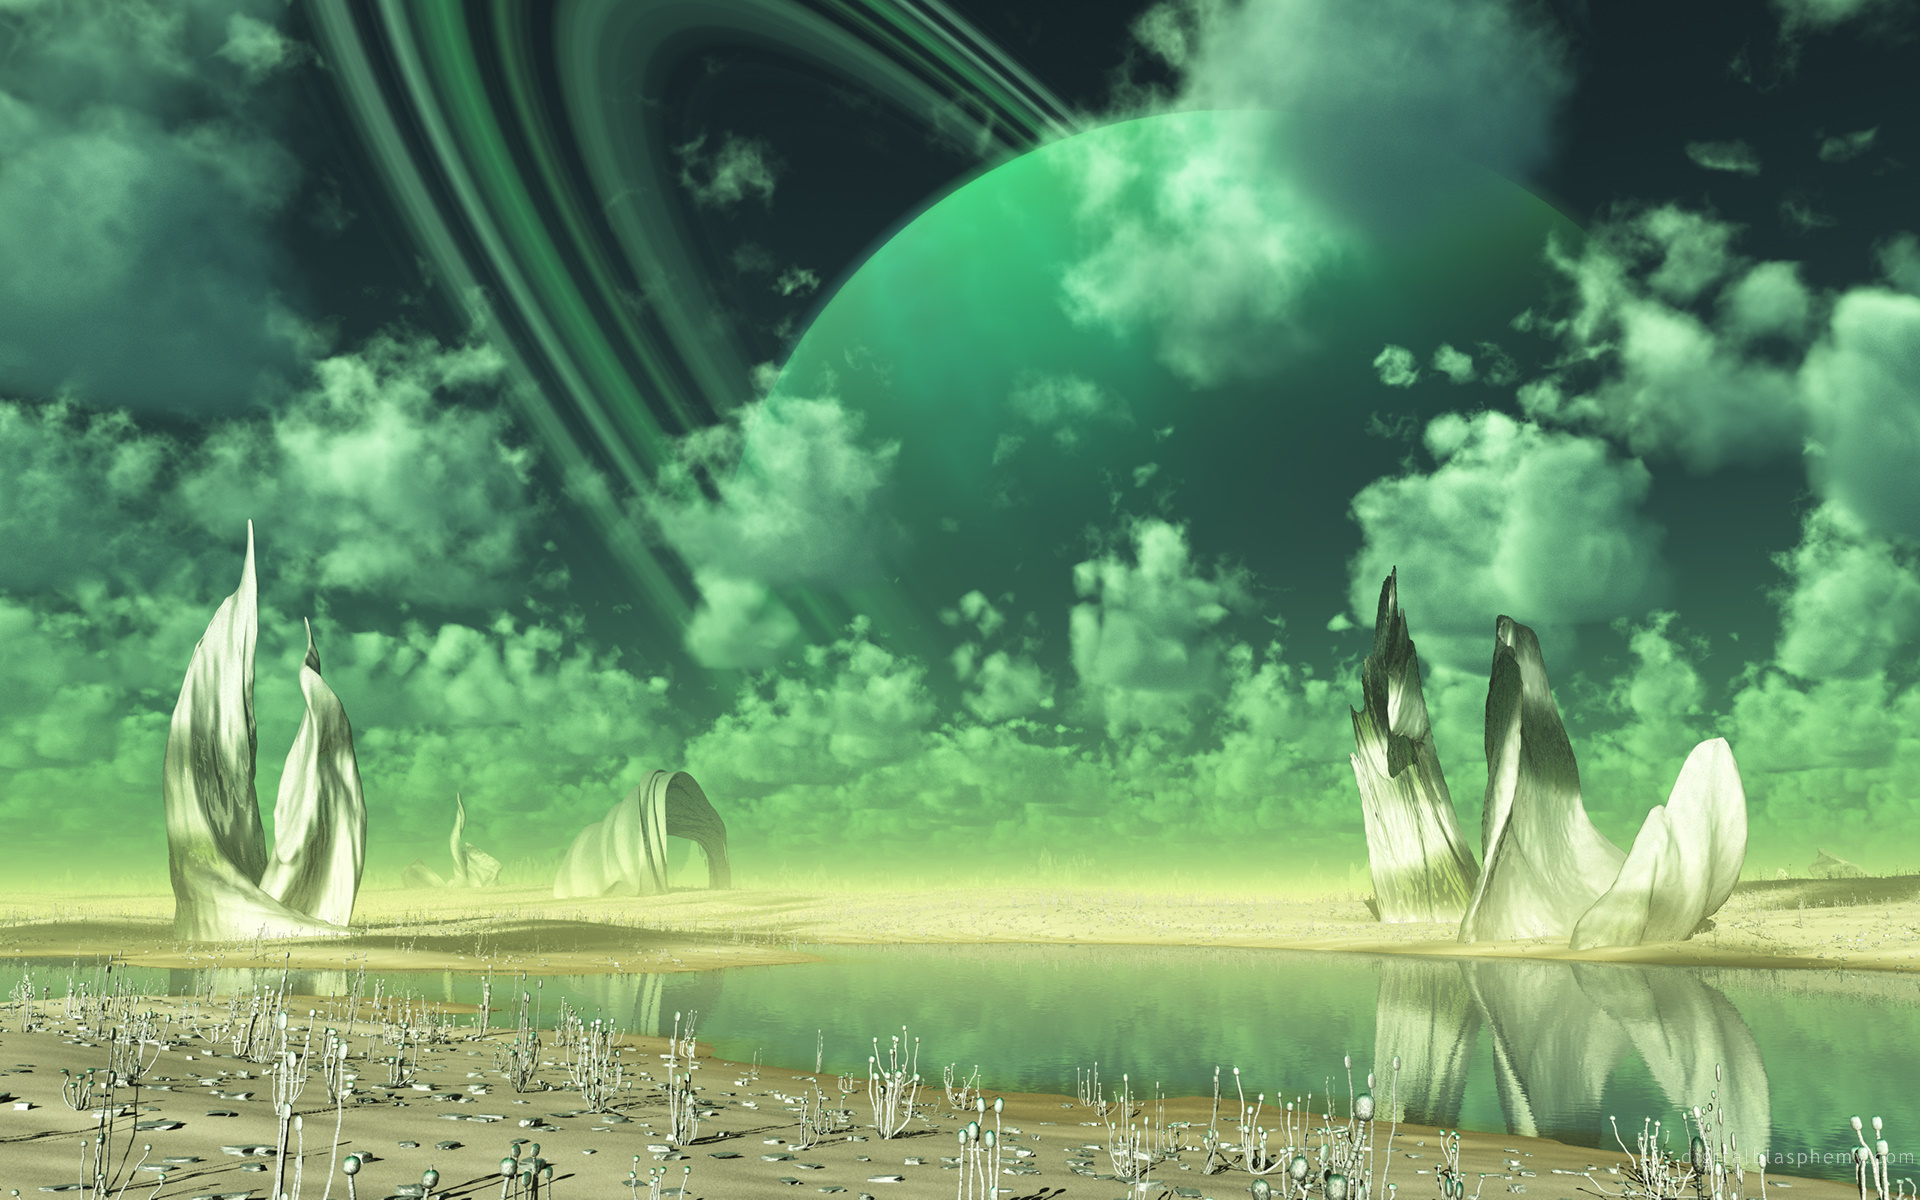 Sci Fi Planetary Ring HD Wallpaper | Background Image